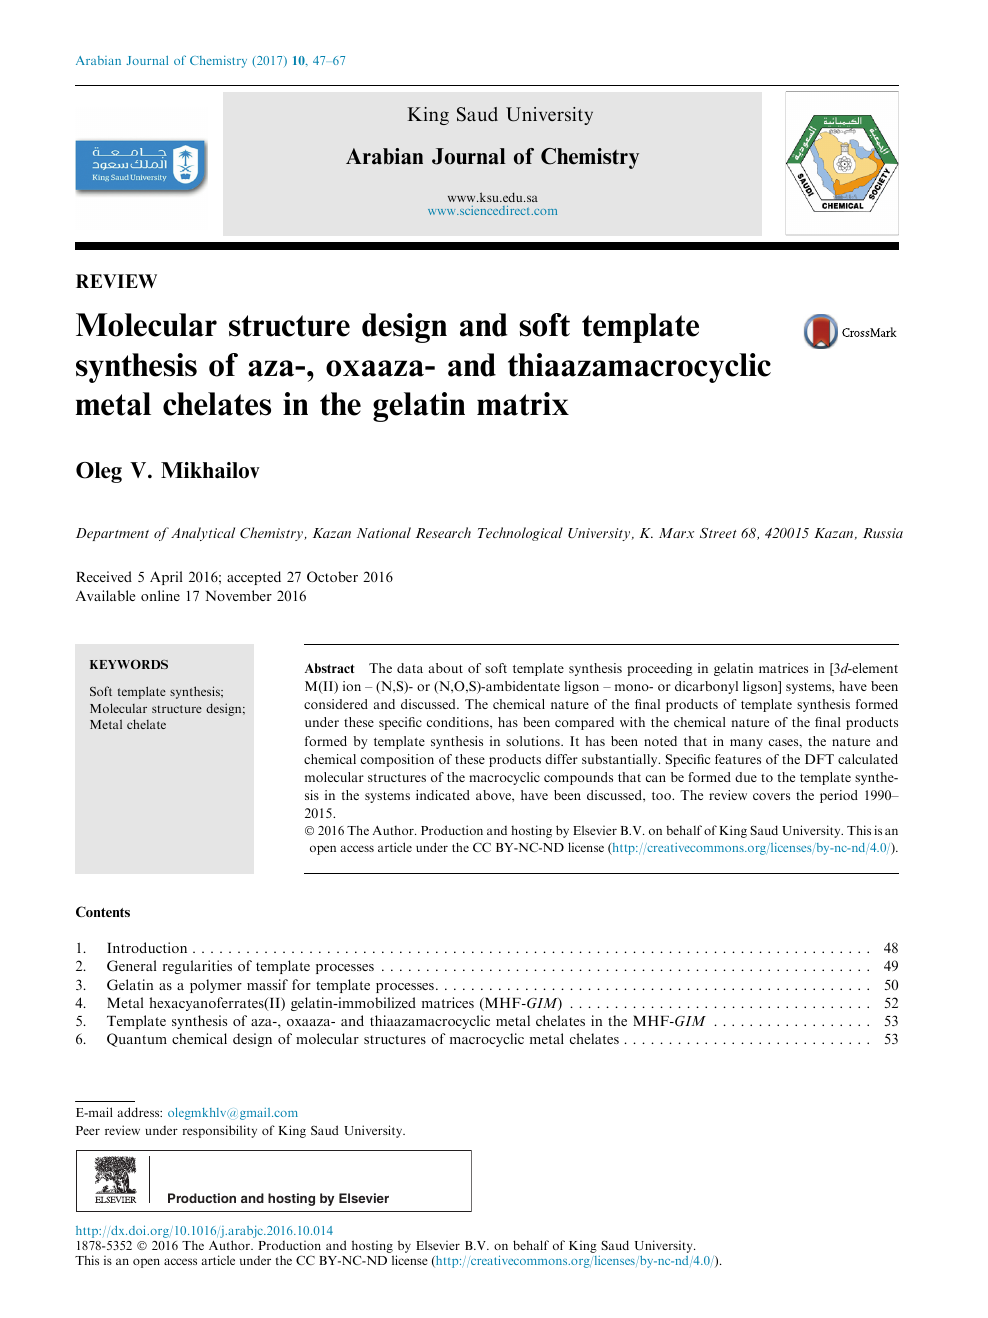 Molecular Structure Design And Soft Template Synthesis Of Aza Oxaaza And Thiaazamacrocyclic Metal Chelates In The Gelatin Matrix Topic Of Research Paper In Chemical Sciences Download Scholarly Article Pdf And Read